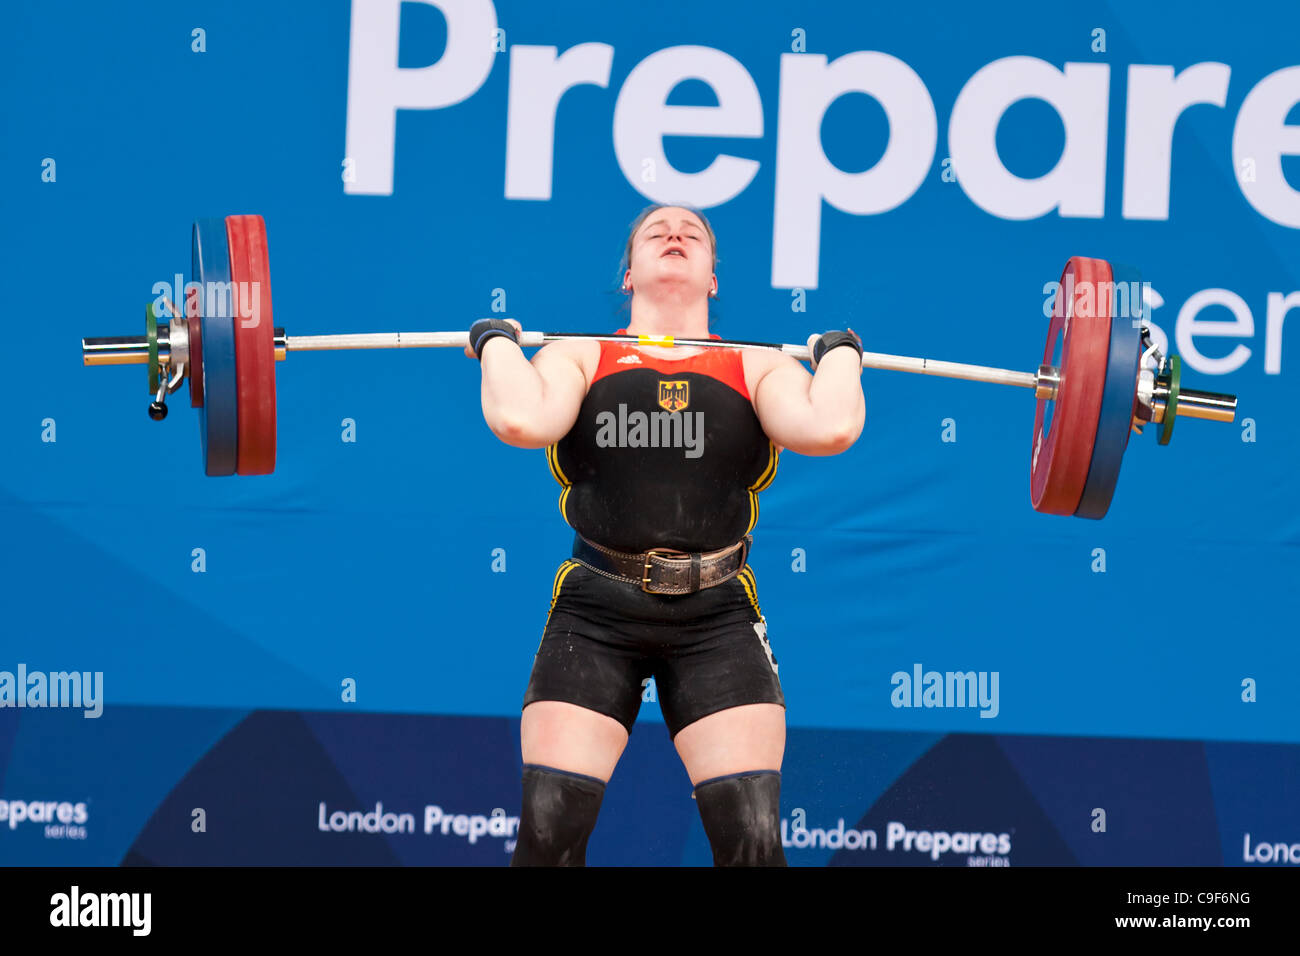 Yvonne KRANZ of Germany Competing in the Group B, Women's +75kg, London Prepares Weightlifting International Invitational, 10–11 Dec 11, ExCel, London, UK. Stock Photo